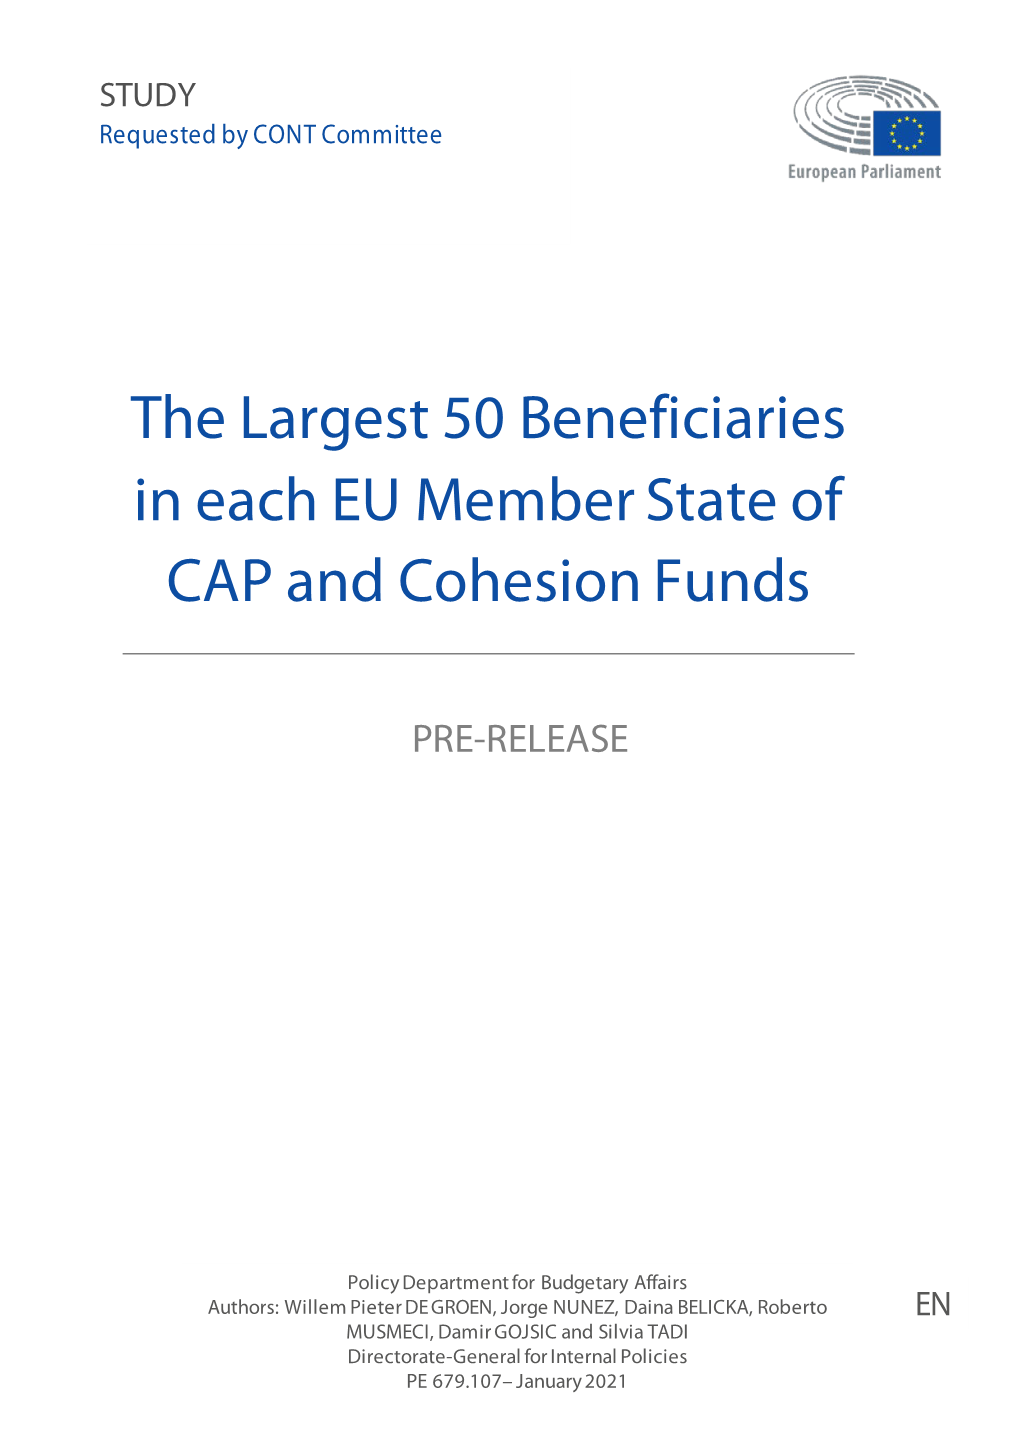 The Largest 50 Beneficiaries in Each EU Member State of CAP and Cohesion Funds” Prepared at the Request of the CONT Committee